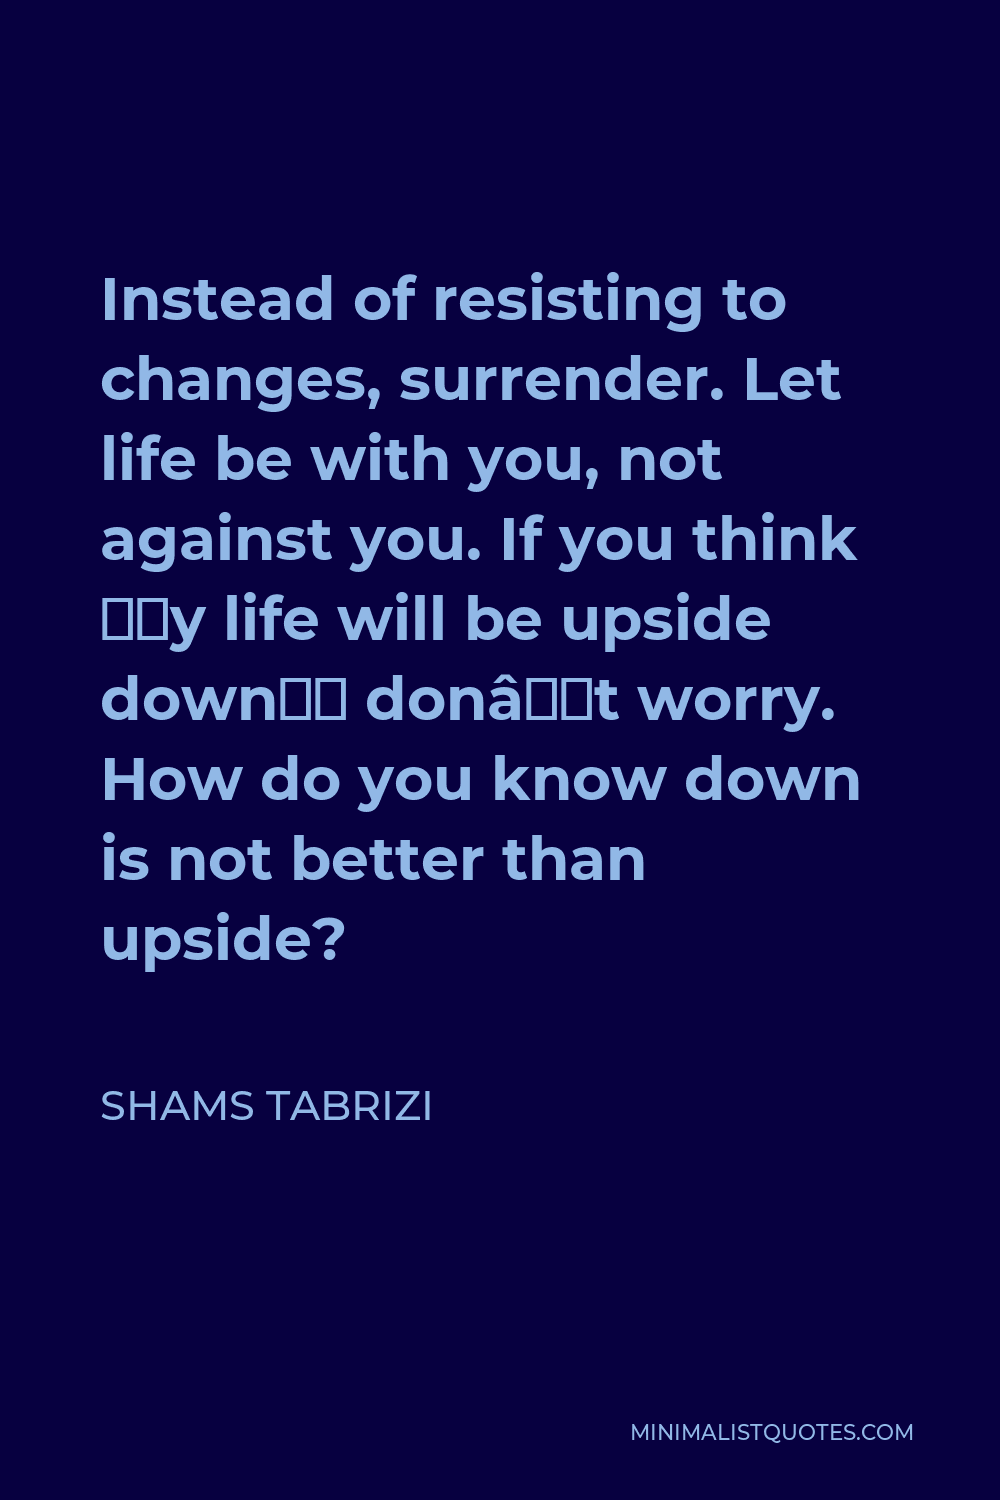 Shams Tabrizi Quote - Instead of resisting to changes, surrender. Let life be with you, not against you. If you think ‘My life will be upside down’ don’t worry. How do you know down is not better than upside?